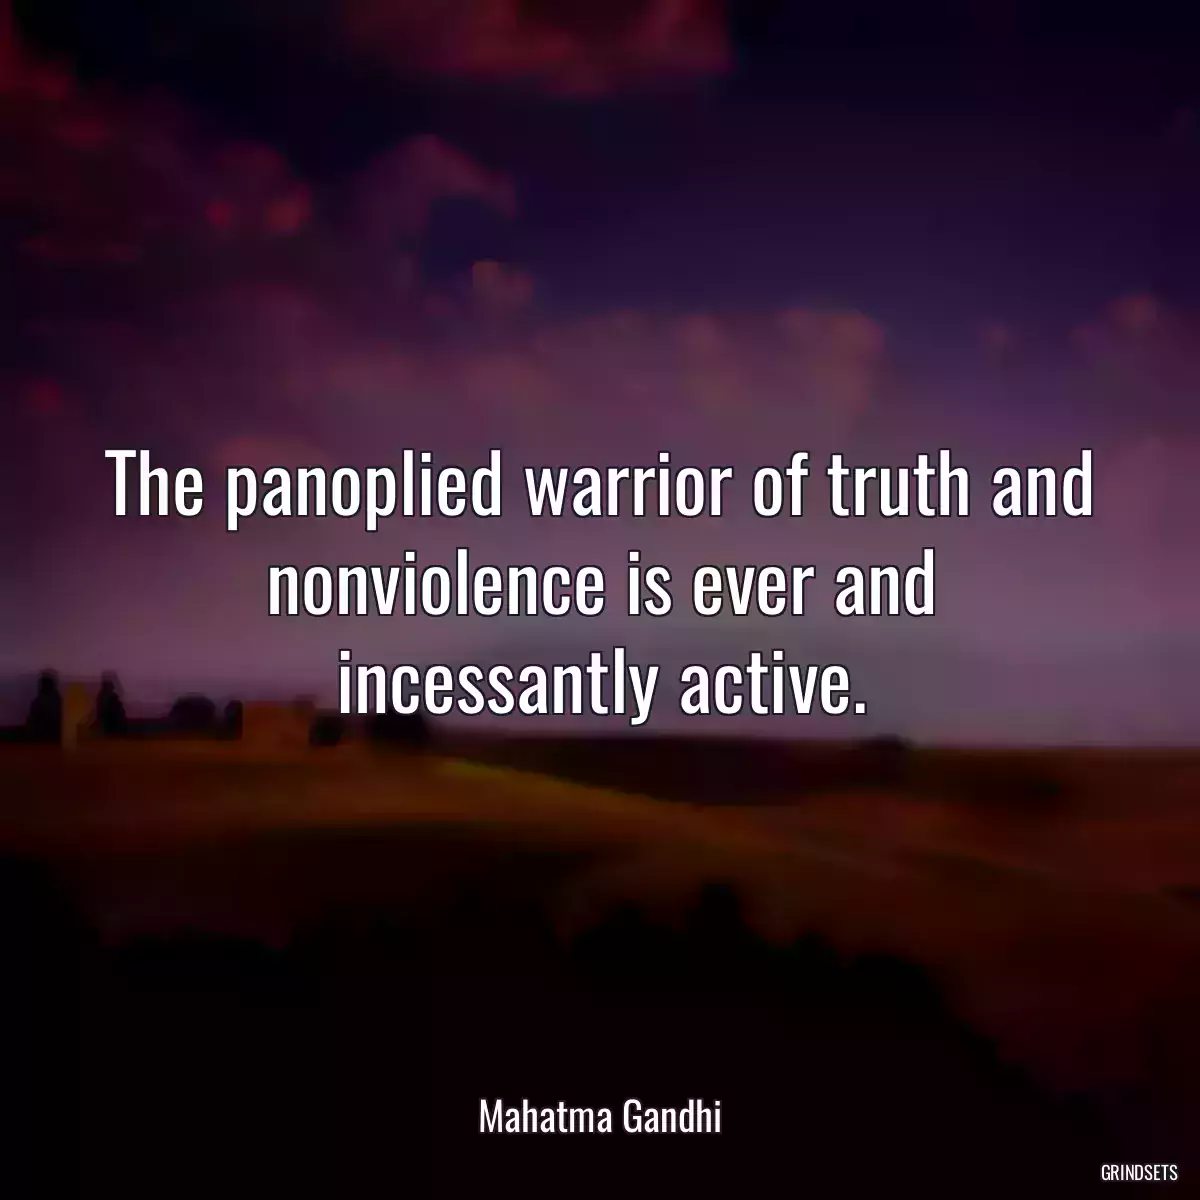 The panoplied warrior of truth and nonviolence is ever and incessantly active.